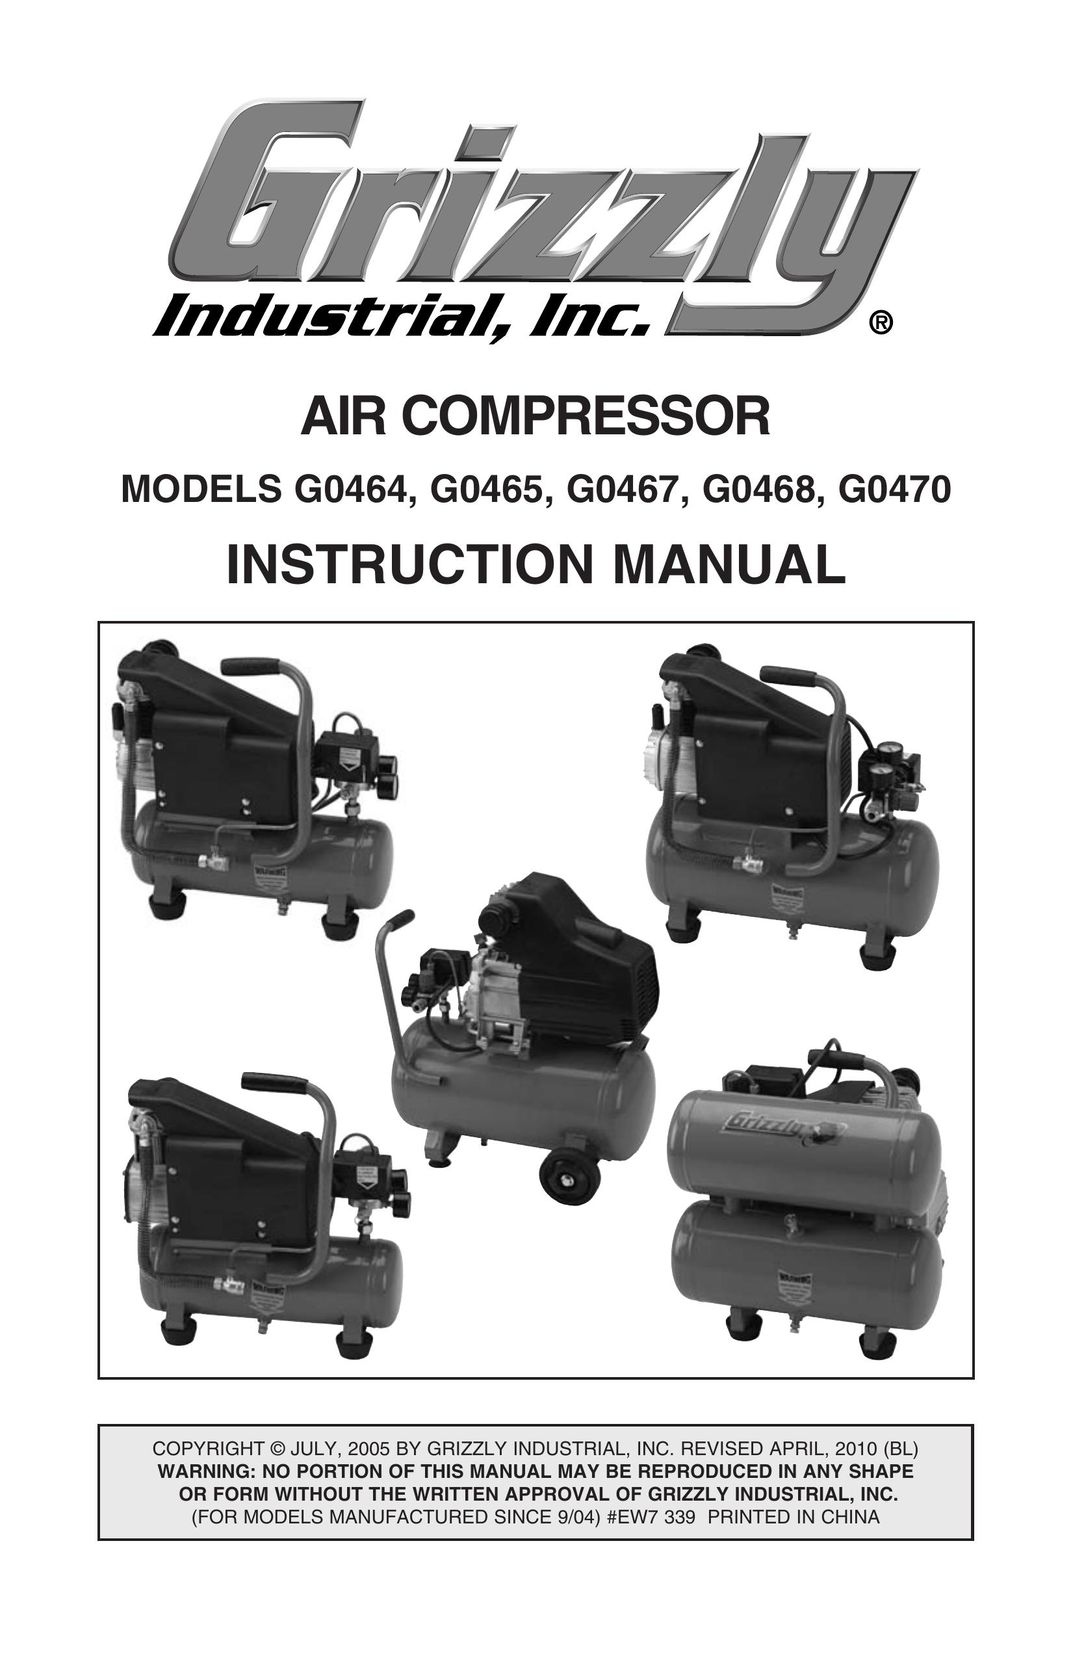 Grizzly G0468 Air Compressor User Manual